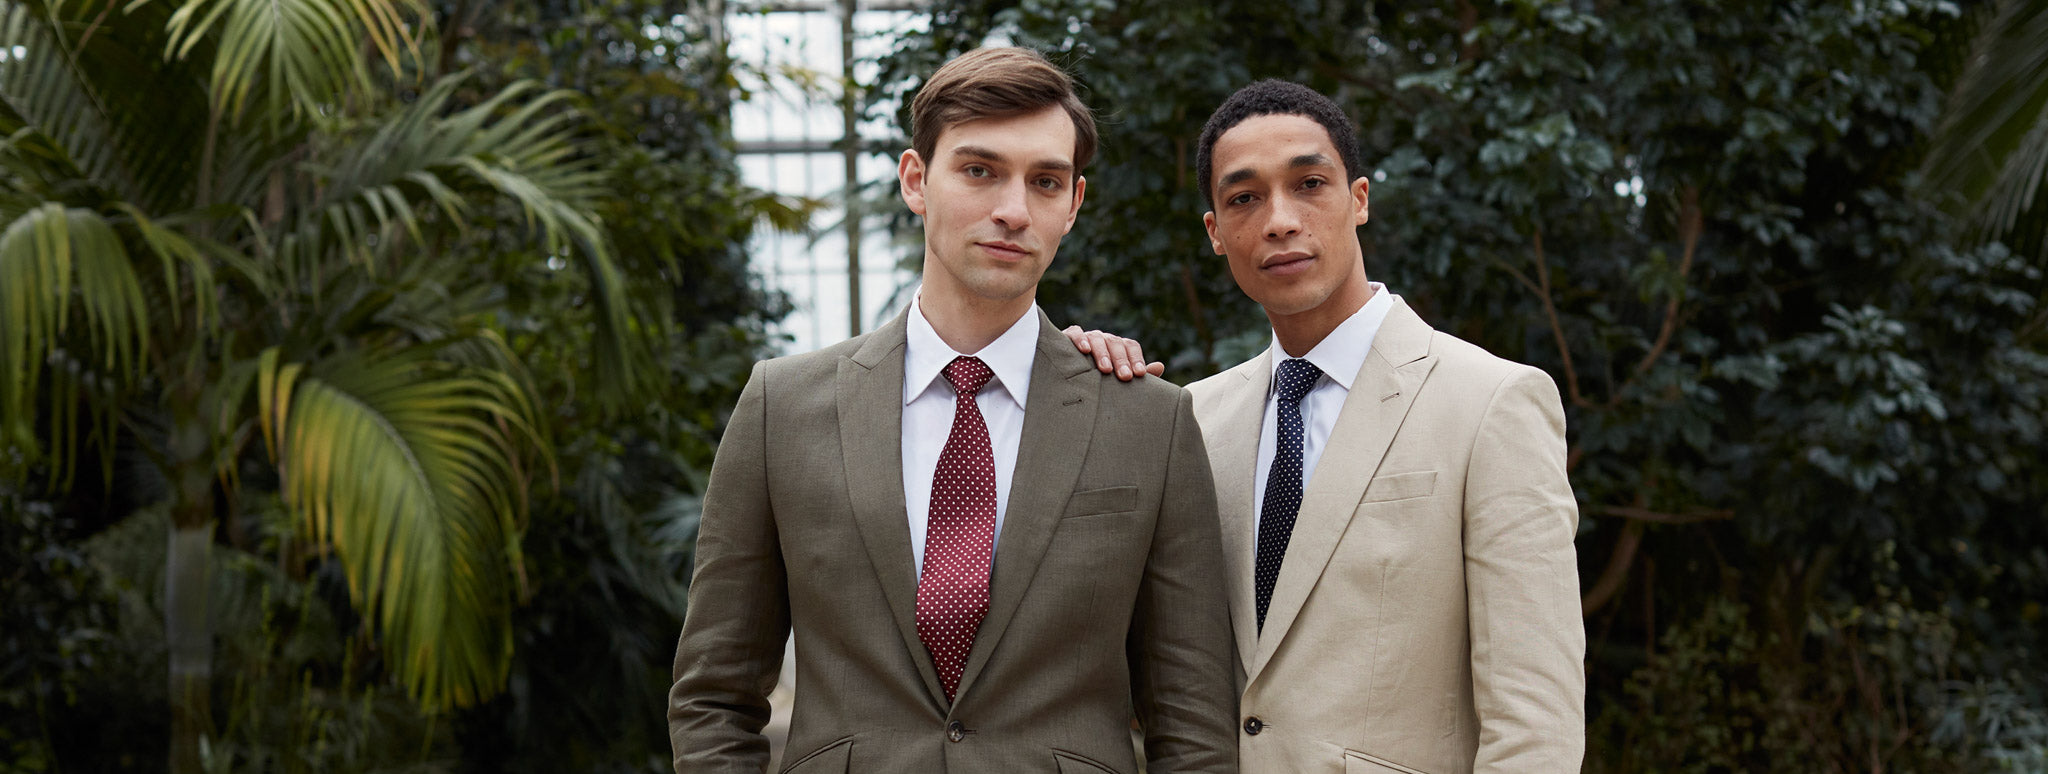 Tailoring in Bloom: the Spring/Summer 23 Menswear Collection